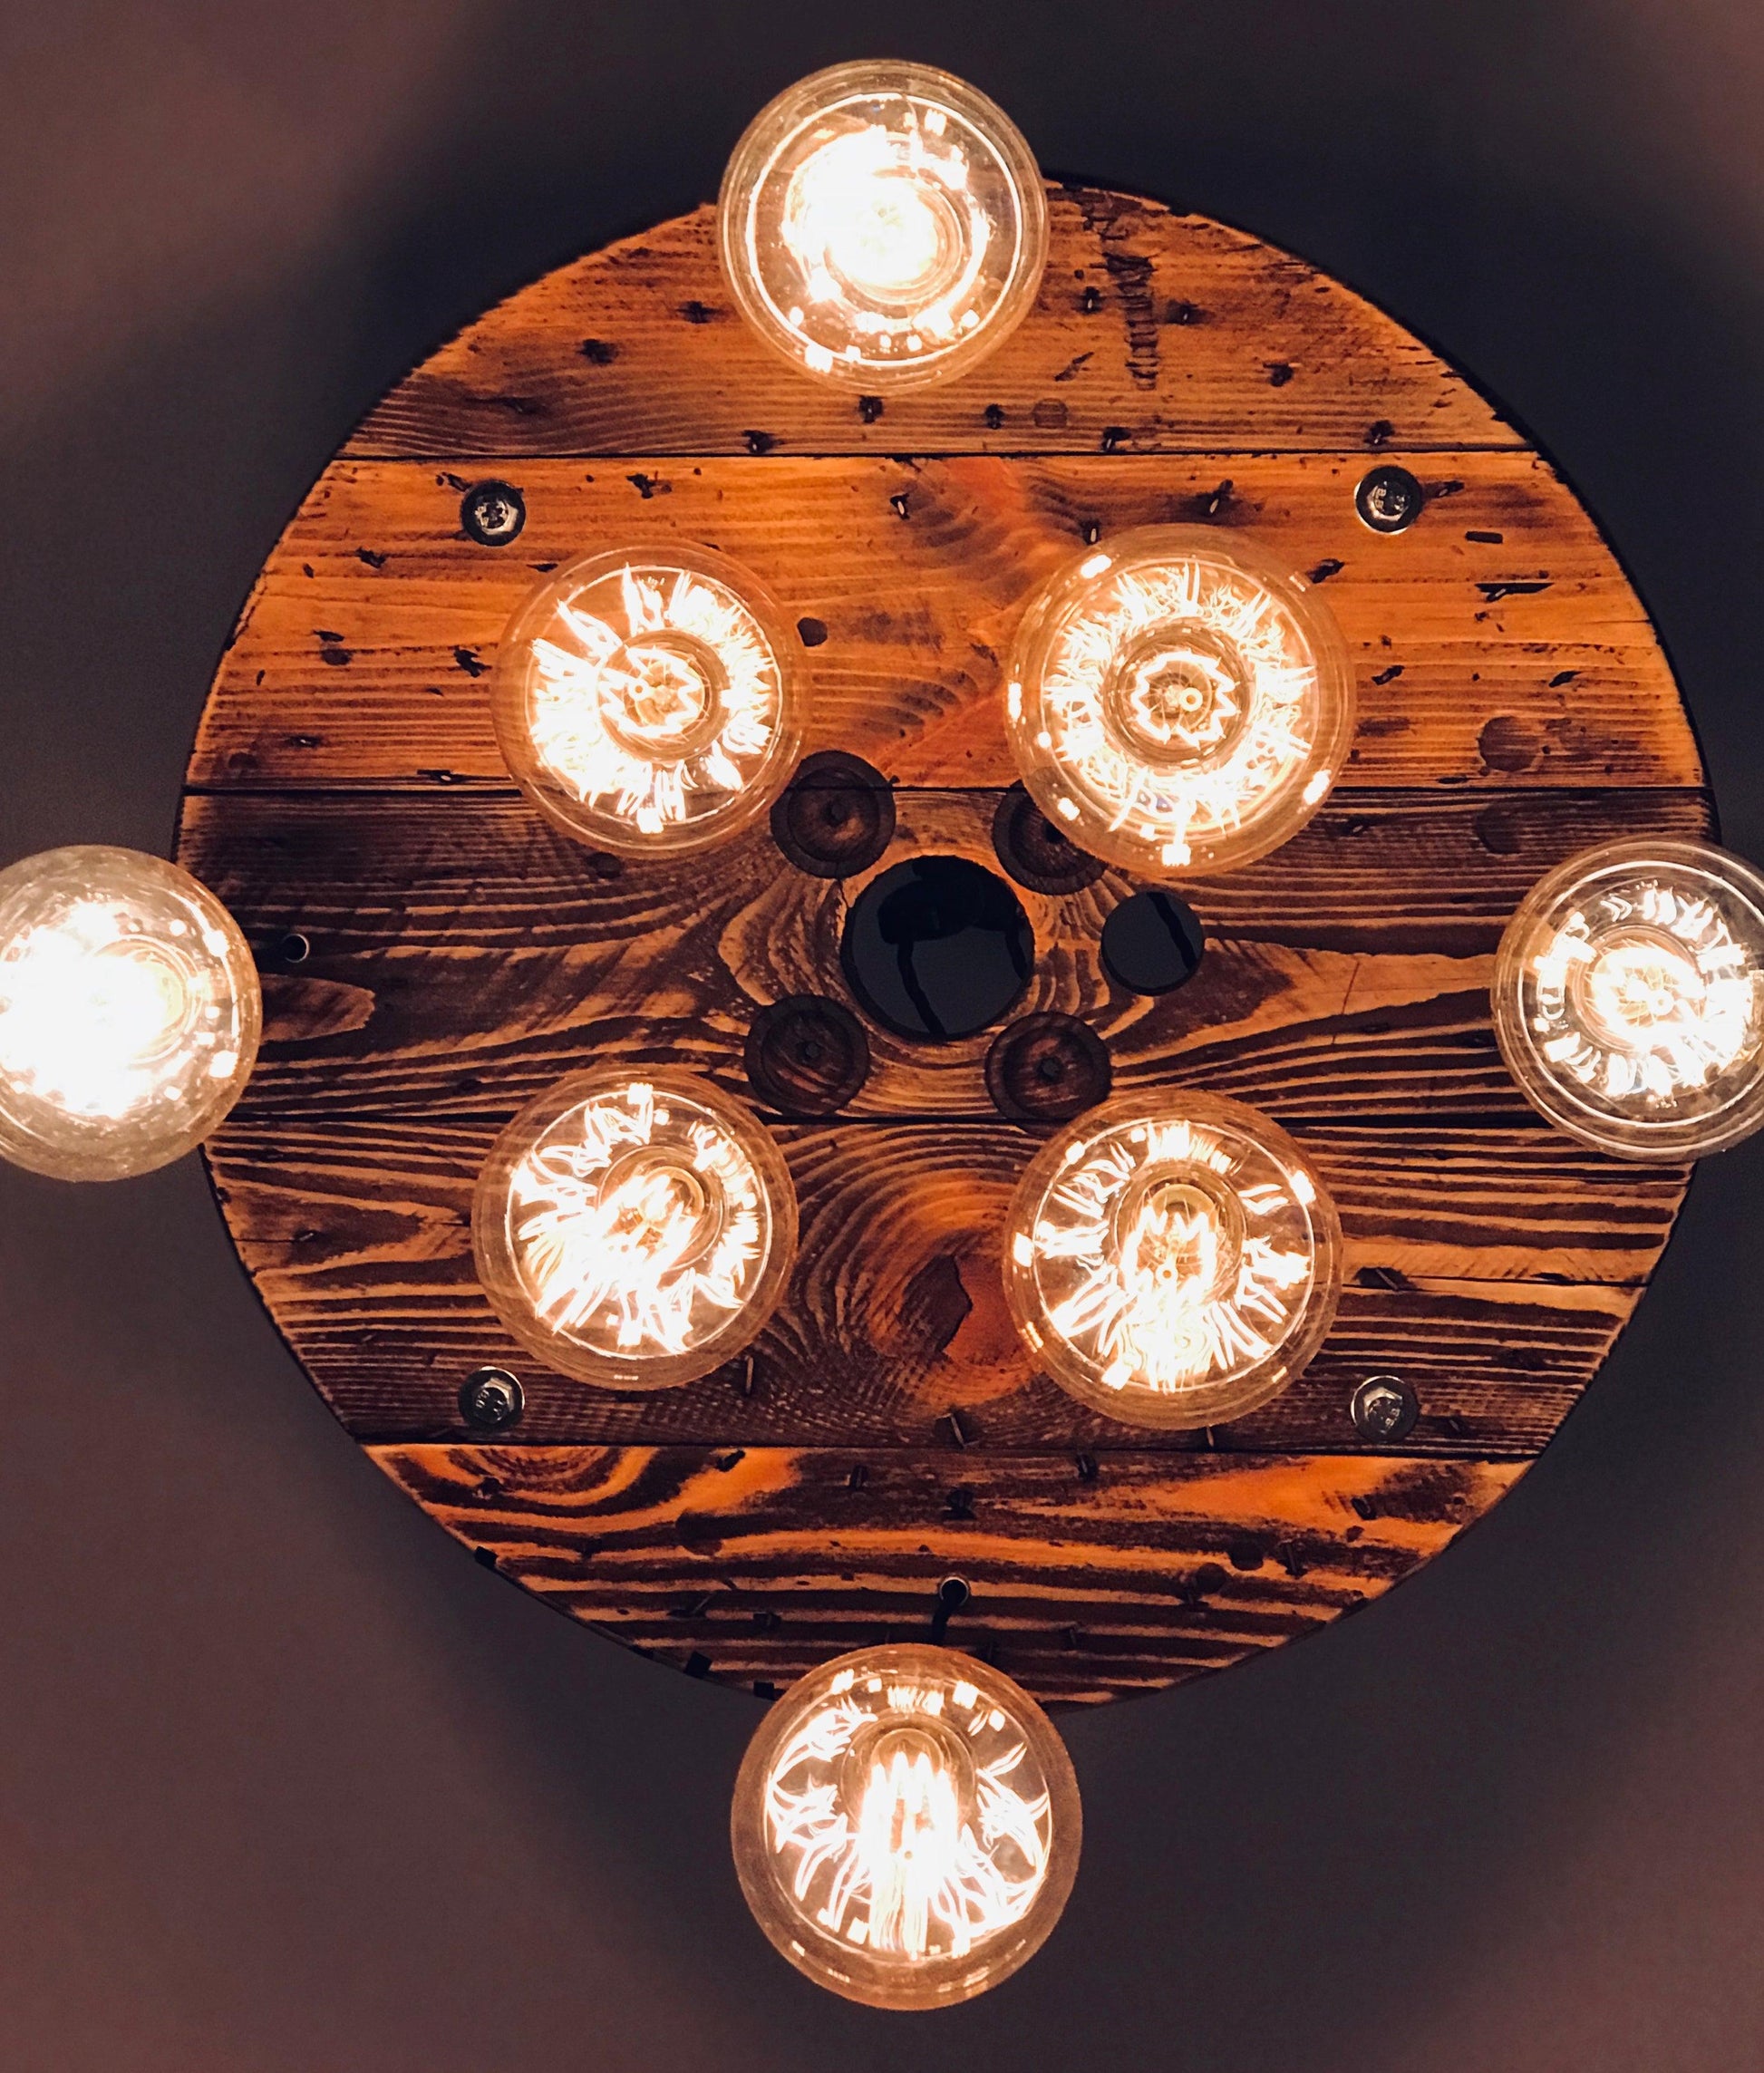 Cable Reel Cascade Chandelier - MooBoo Home